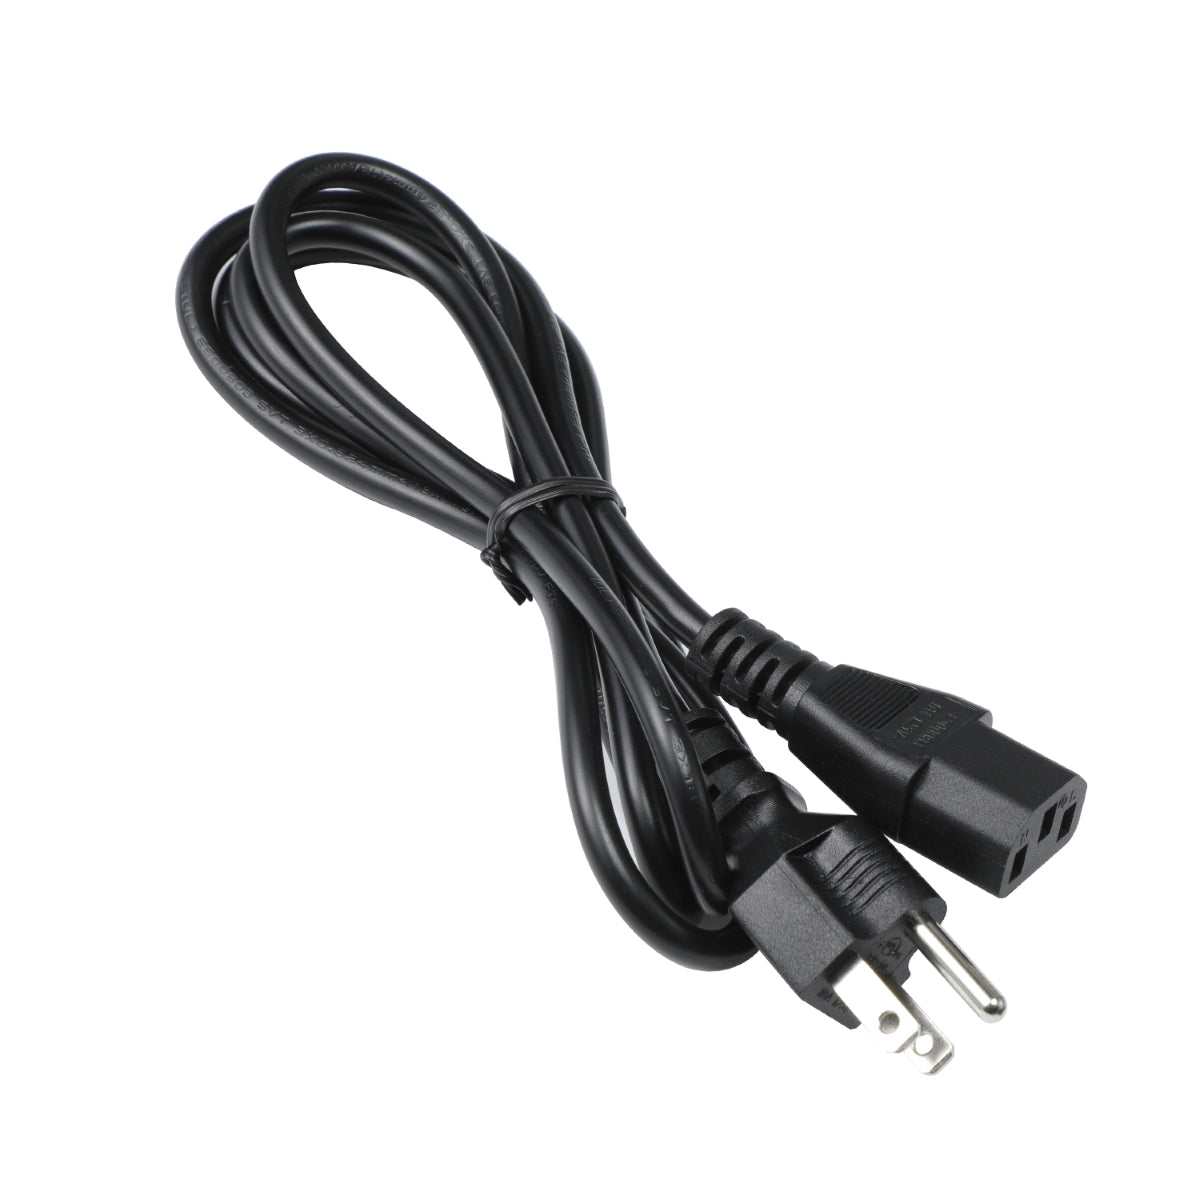 Power Cord for Acer EI342CKR Sbmiipphx Monitor